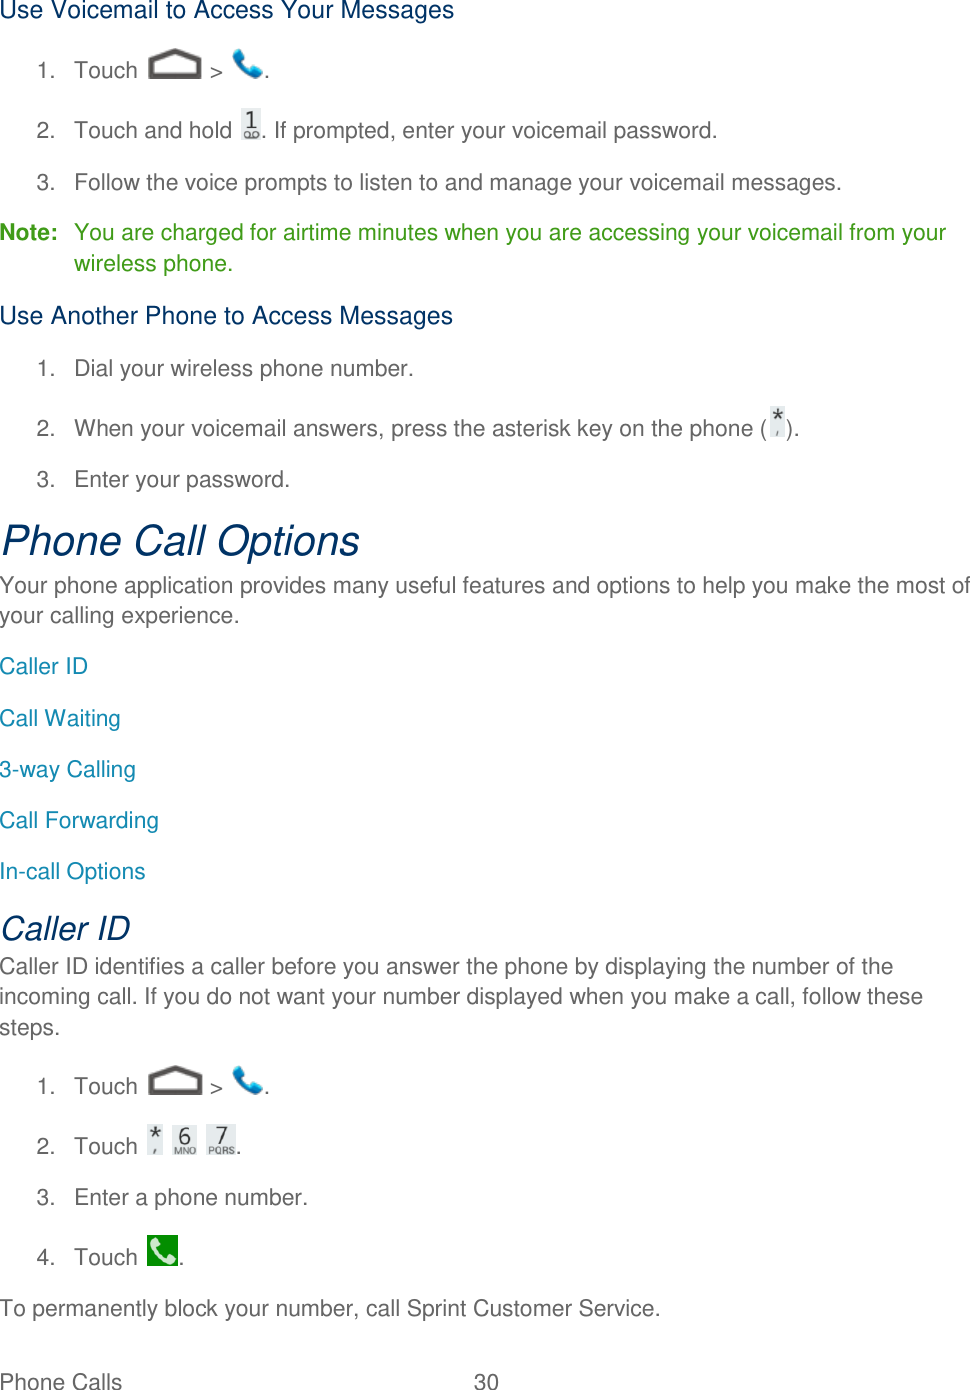 Phone Calls  30   Use Voicemail to Access Your Messages 1.  Touch   &gt;  . 2.  Touch and hold  . If prompted, enter your voicemail password. 3.  Follow the voice prompts to listen to and manage your voicemail messages. Note:  You are charged for airtime minutes when you are accessing your voicemail from your wireless phone. Use Another Phone to Access Messages 1.  Dial your wireless phone number. 2.  When your voicemail answers, press the asterisk key on the phone ( ). 3.  Enter your password.  Phone Call Options Your phone application provides many useful features and options to help you make the most of your calling experience. Caller ID Call Waiting 3-way Calling Call Forwarding In-call Options Caller ID Caller ID identifies a caller before you answer the phone by displaying the number of the incoming call. If you do not want your number displayed when you make a call, follow these steps. 1.  Touch   &gt;  . 2.  Touch      . 3.  Enter a phone number. 4.  Touch  . To permanently block your number, call Sprint Customer Service. 